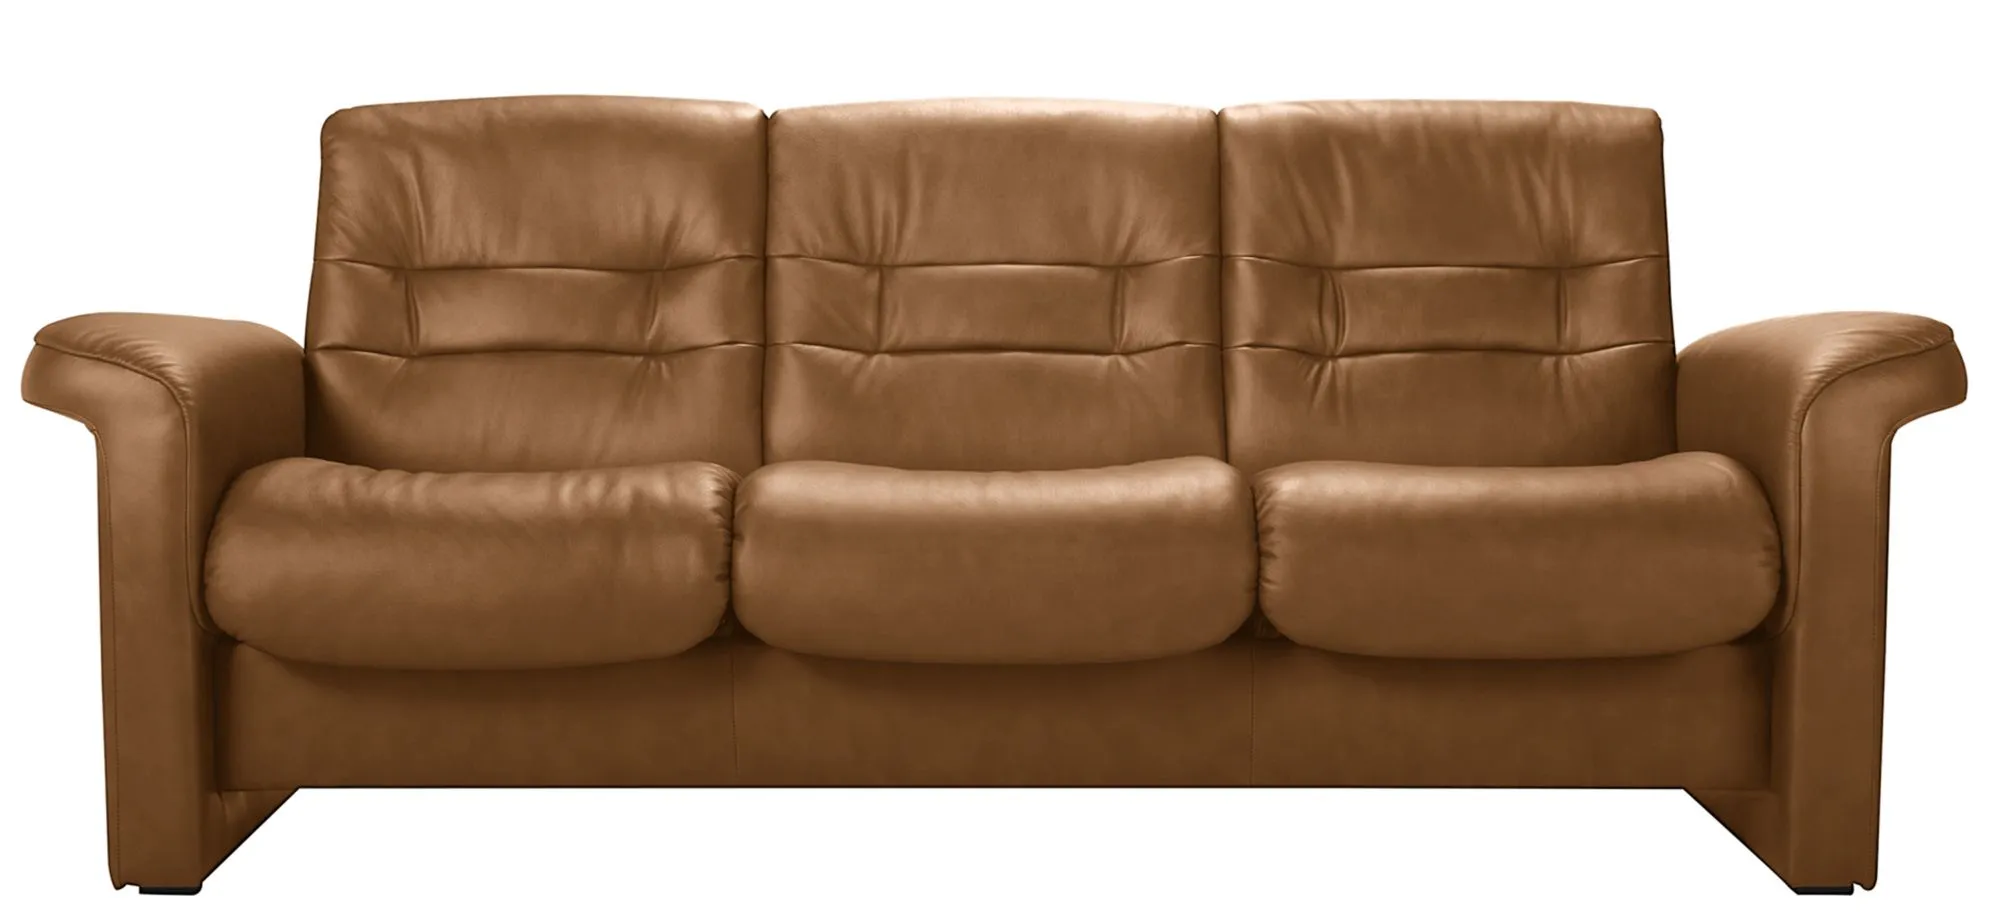 Stressless Sapphire Leather Reclining Low-Back Sofa in Paloma Taupe by Stressless